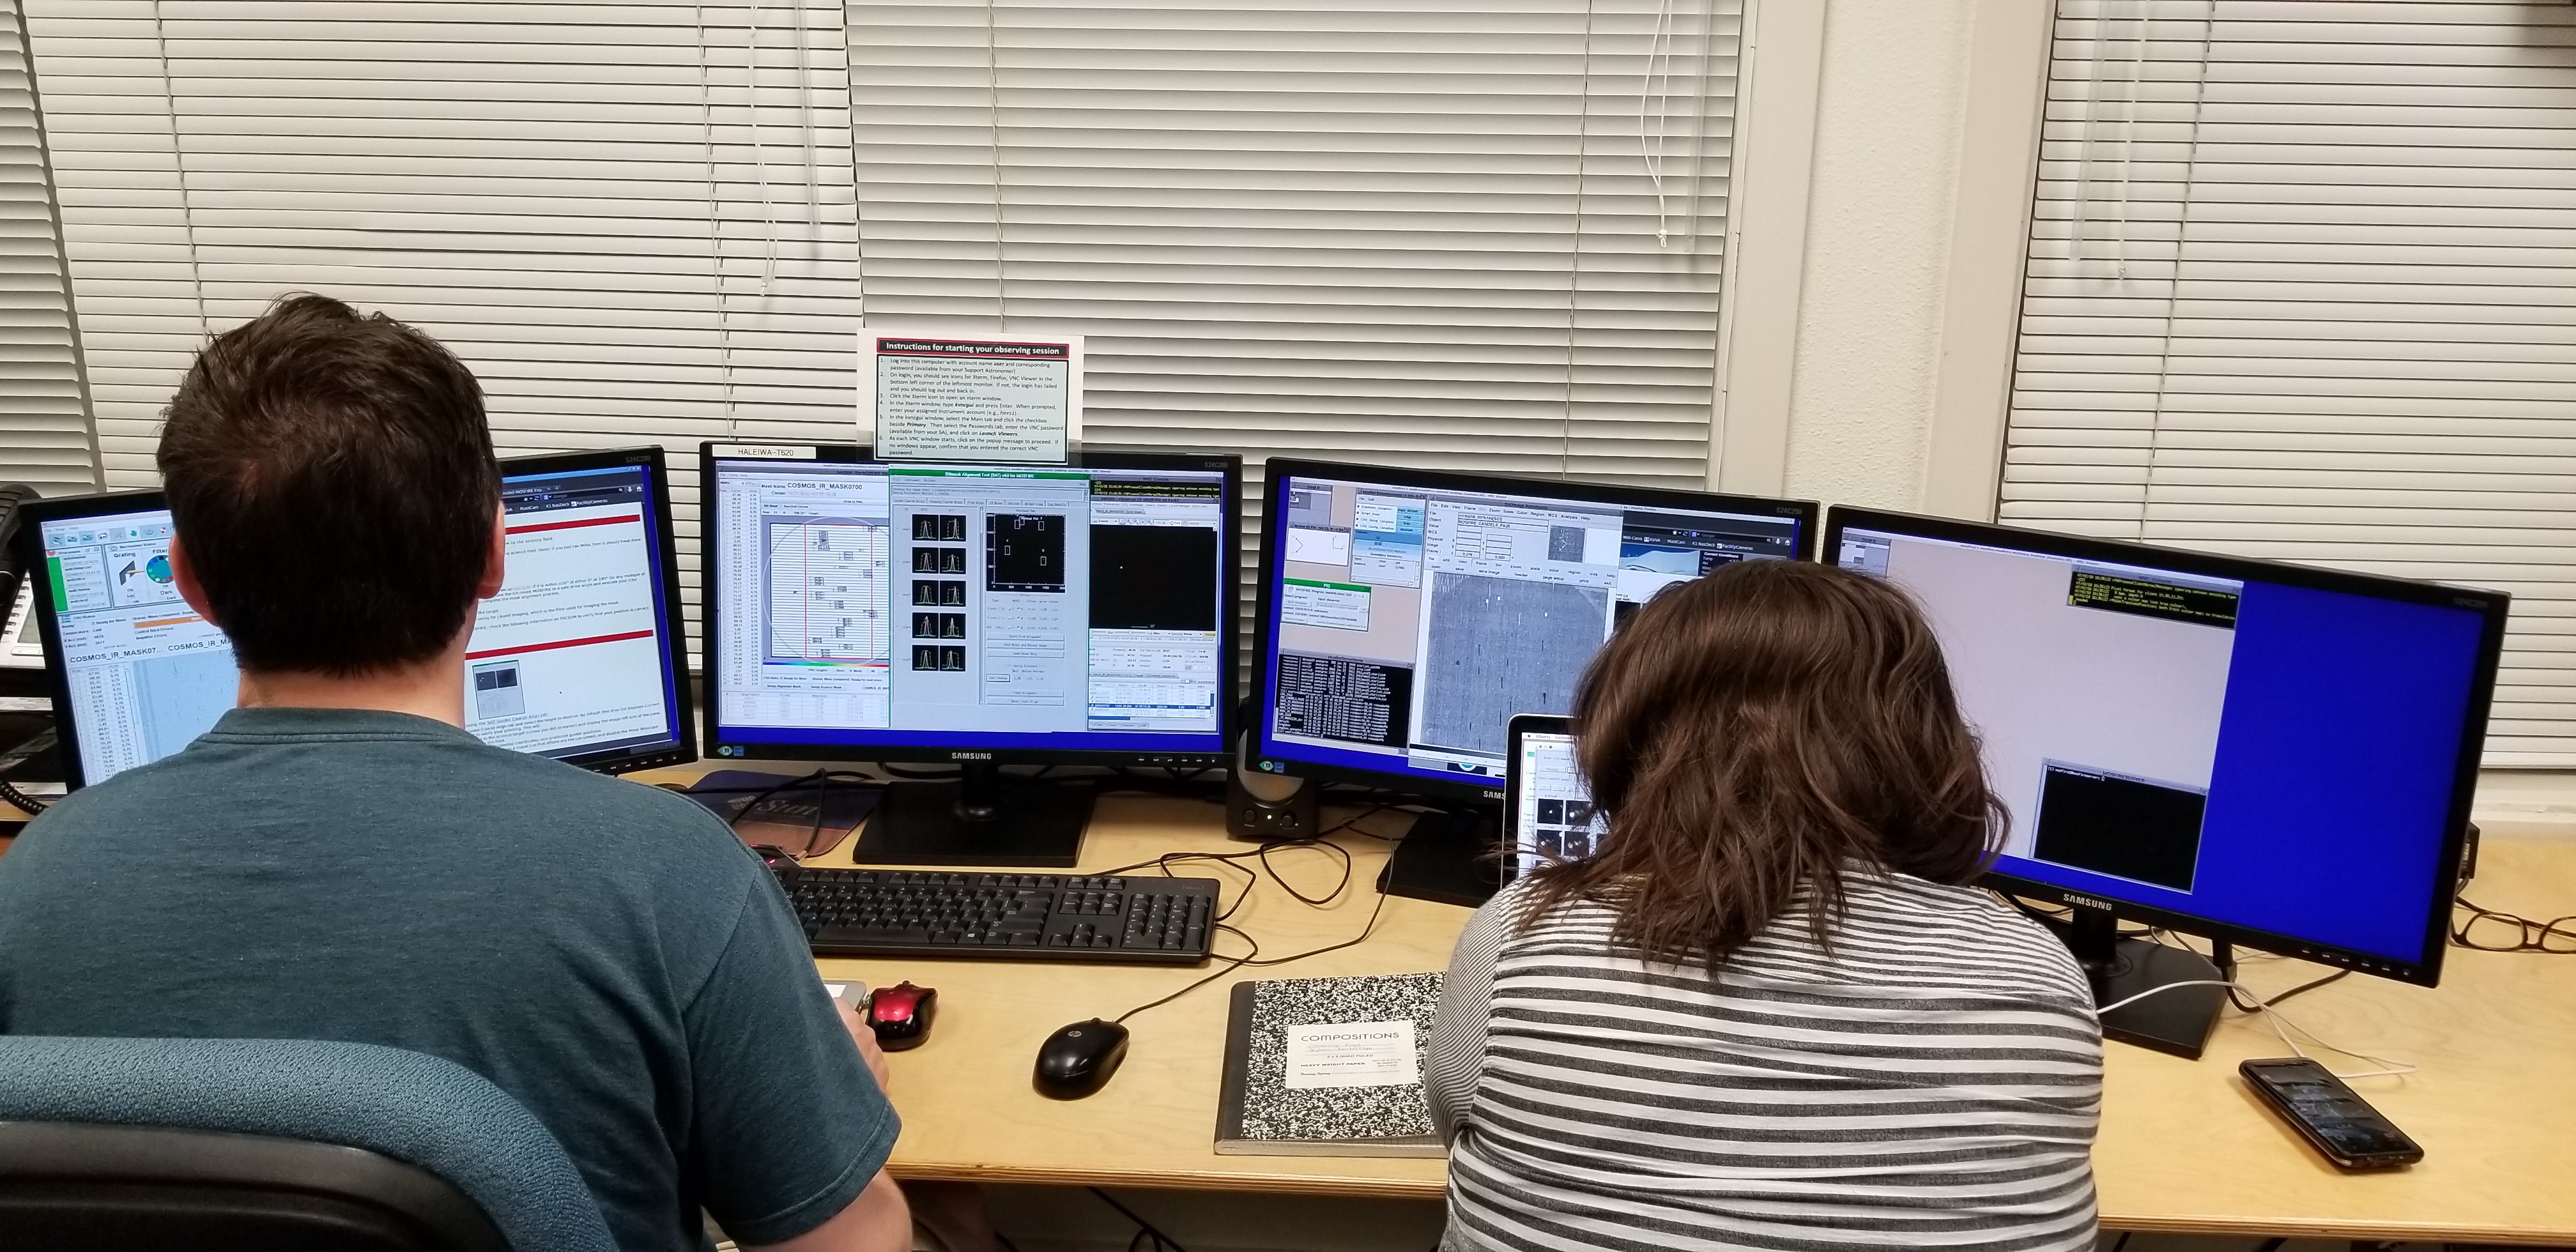 Graduate students Kevin Cooke and Brittany Vanderhoof observing at the Keck I telescope using the MOSFIRE instrument in February 2018.